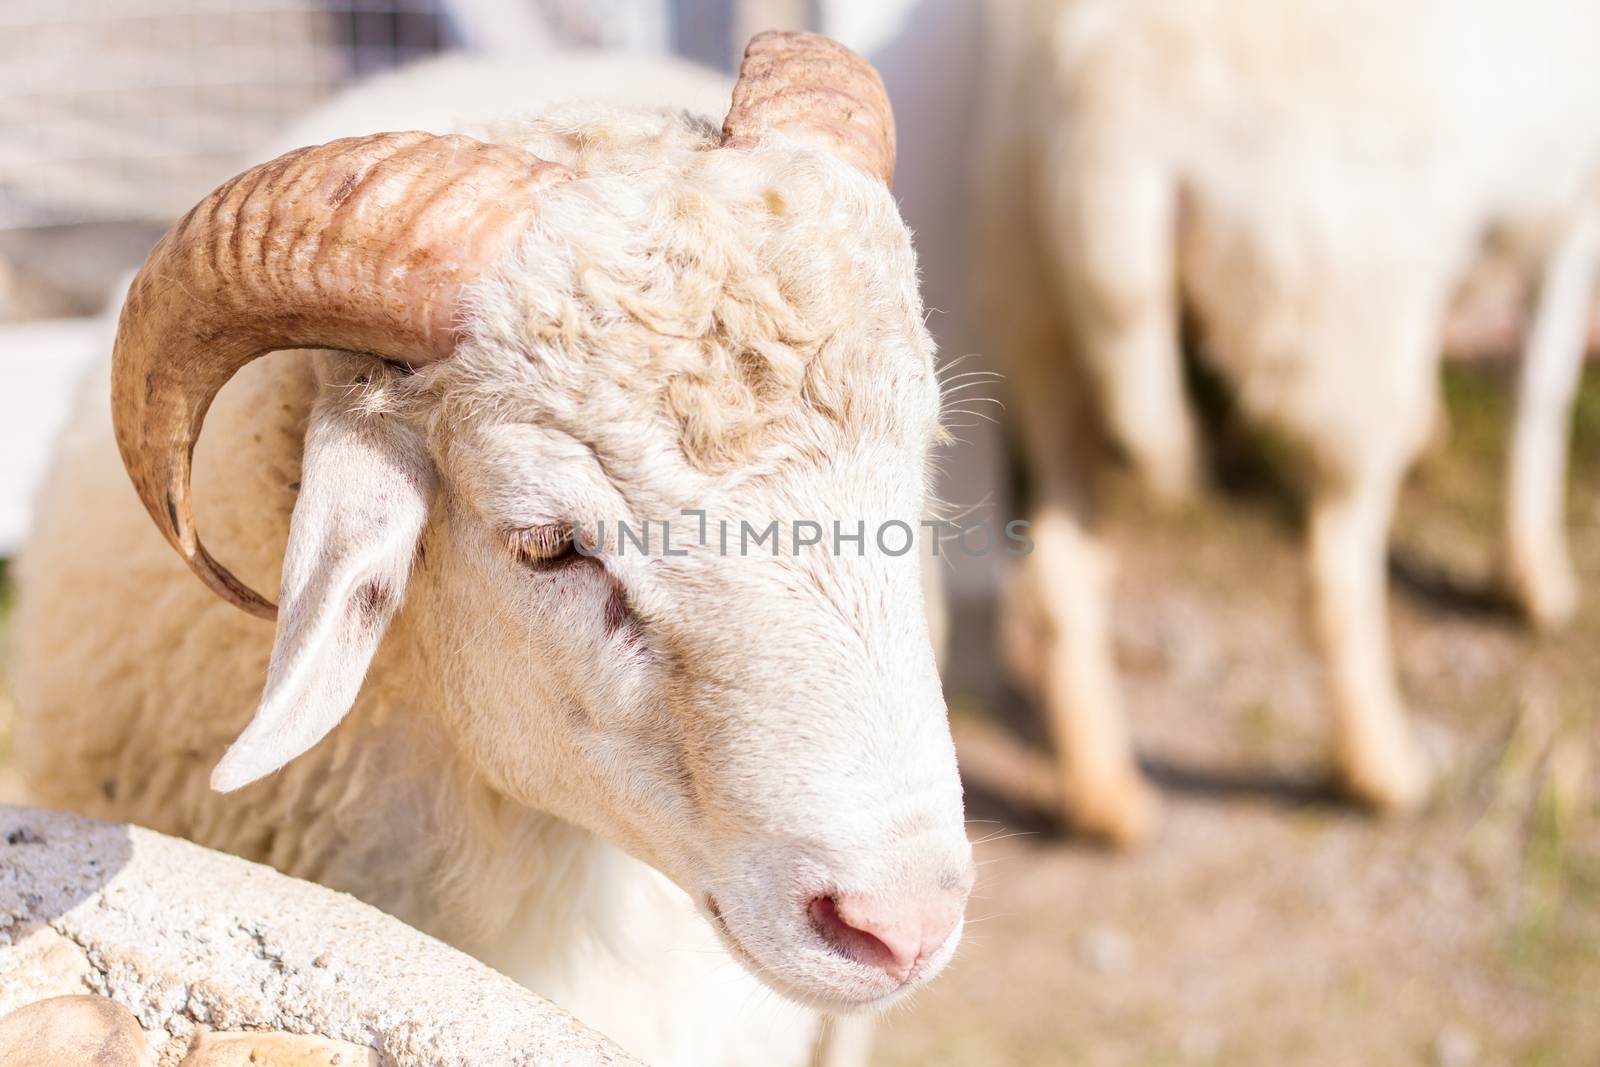 Goats and sheep in farm animals agriculture and nature .